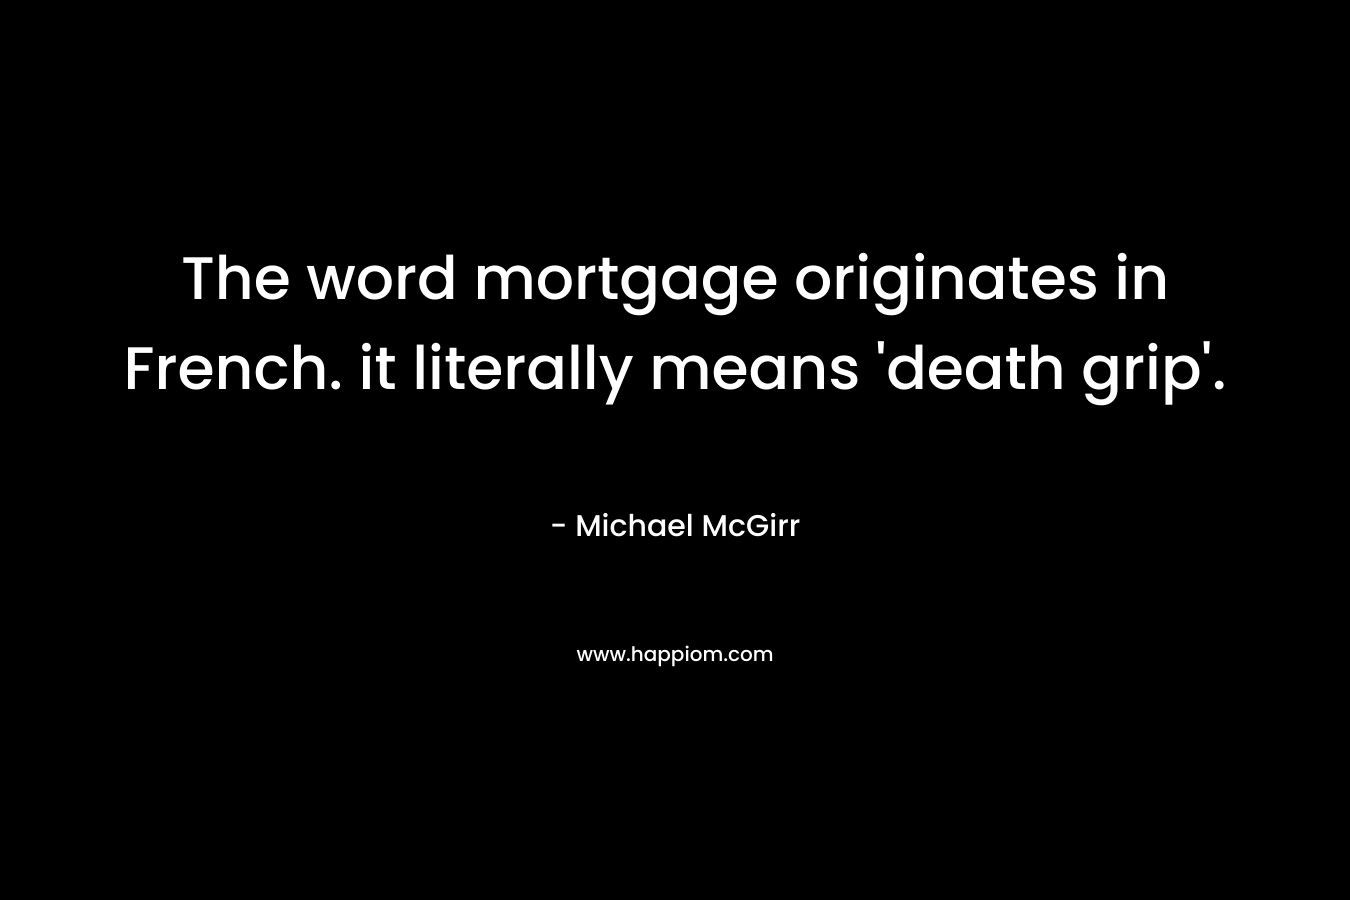 The word mortgage originates in French. it literally means 'death grip'.